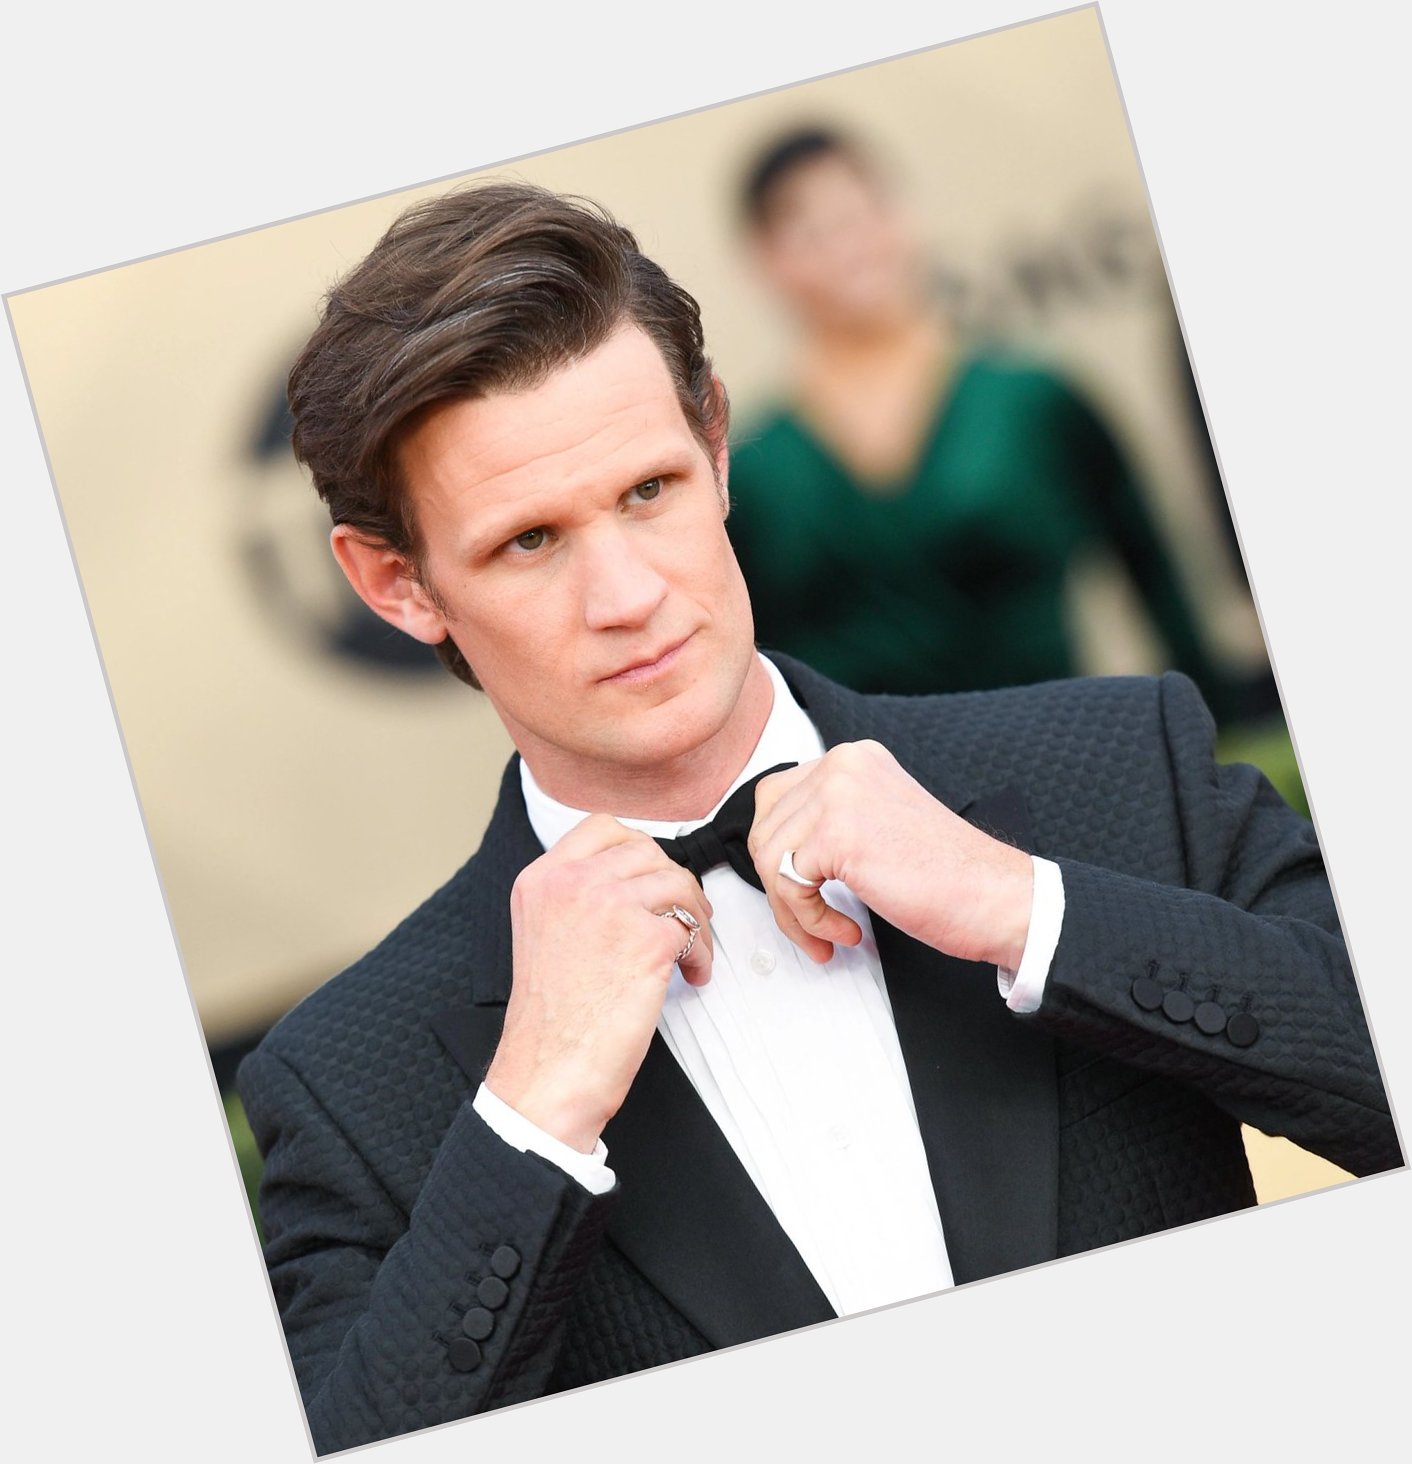 Happy 40th Birthday to Matt Smith

How this man is 40, I have no idea. Forever the Doctor in our hearts 